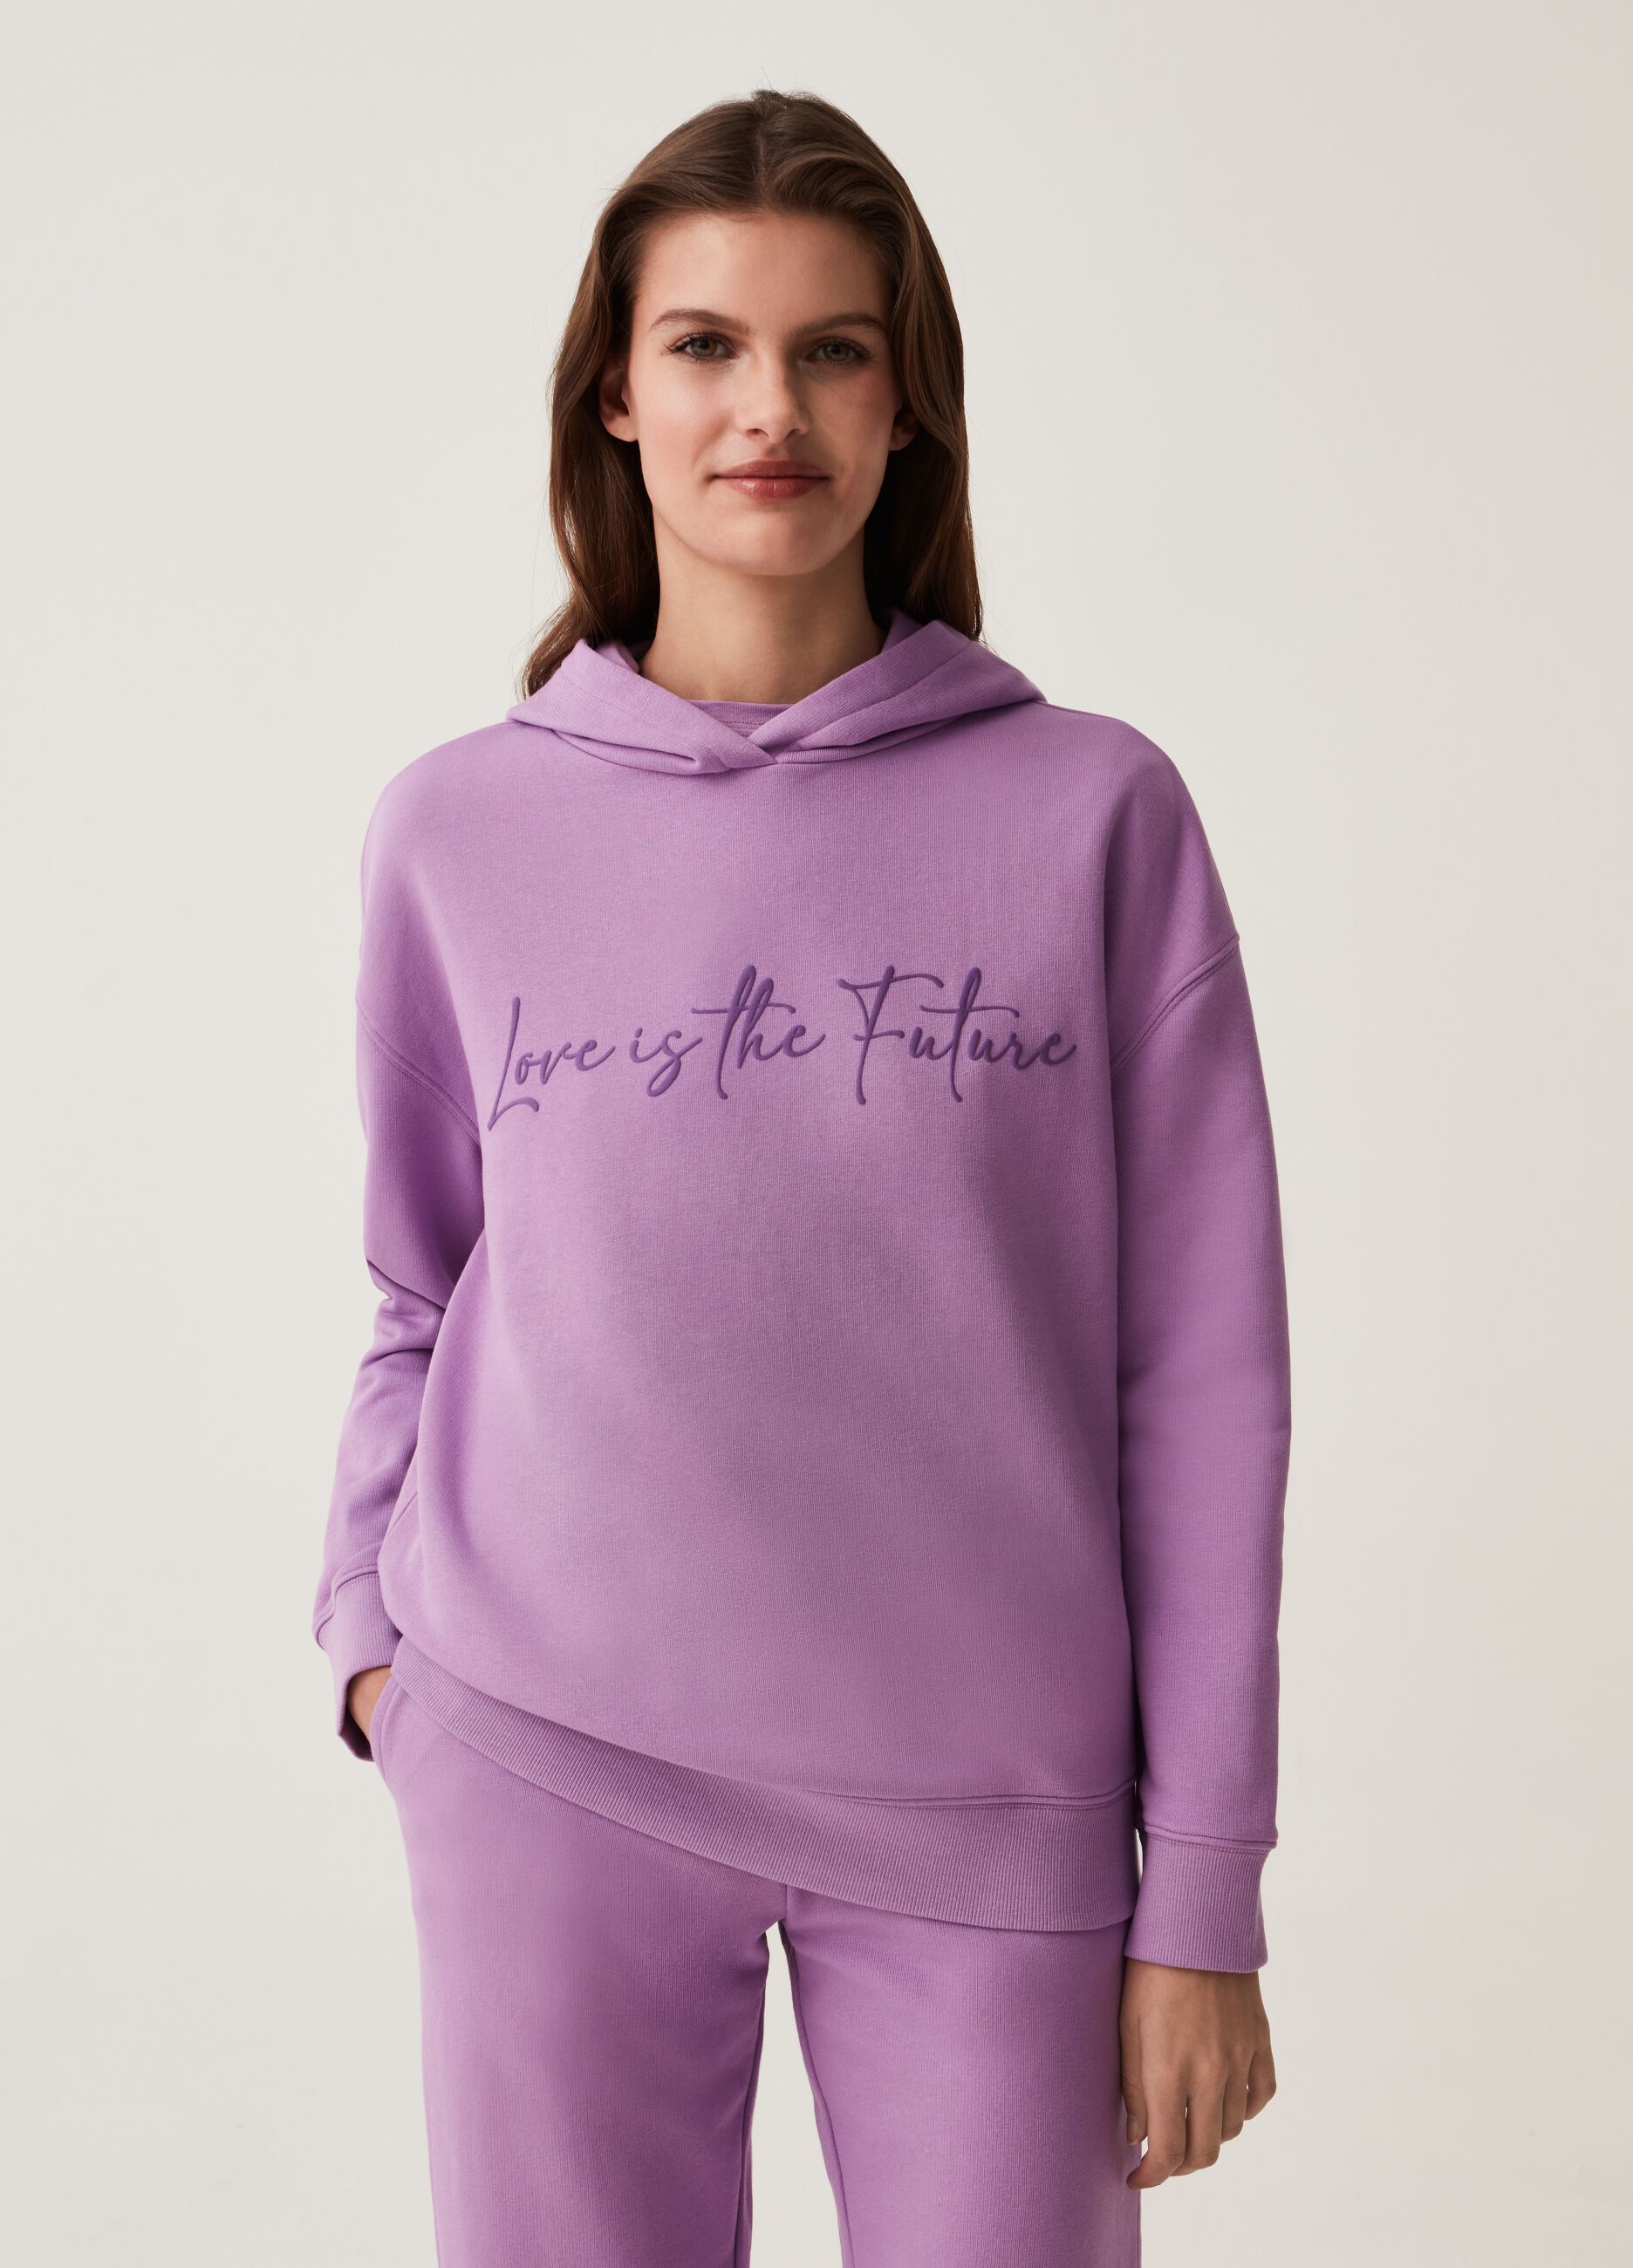 Fitness sweatshirt with hood and lettering print